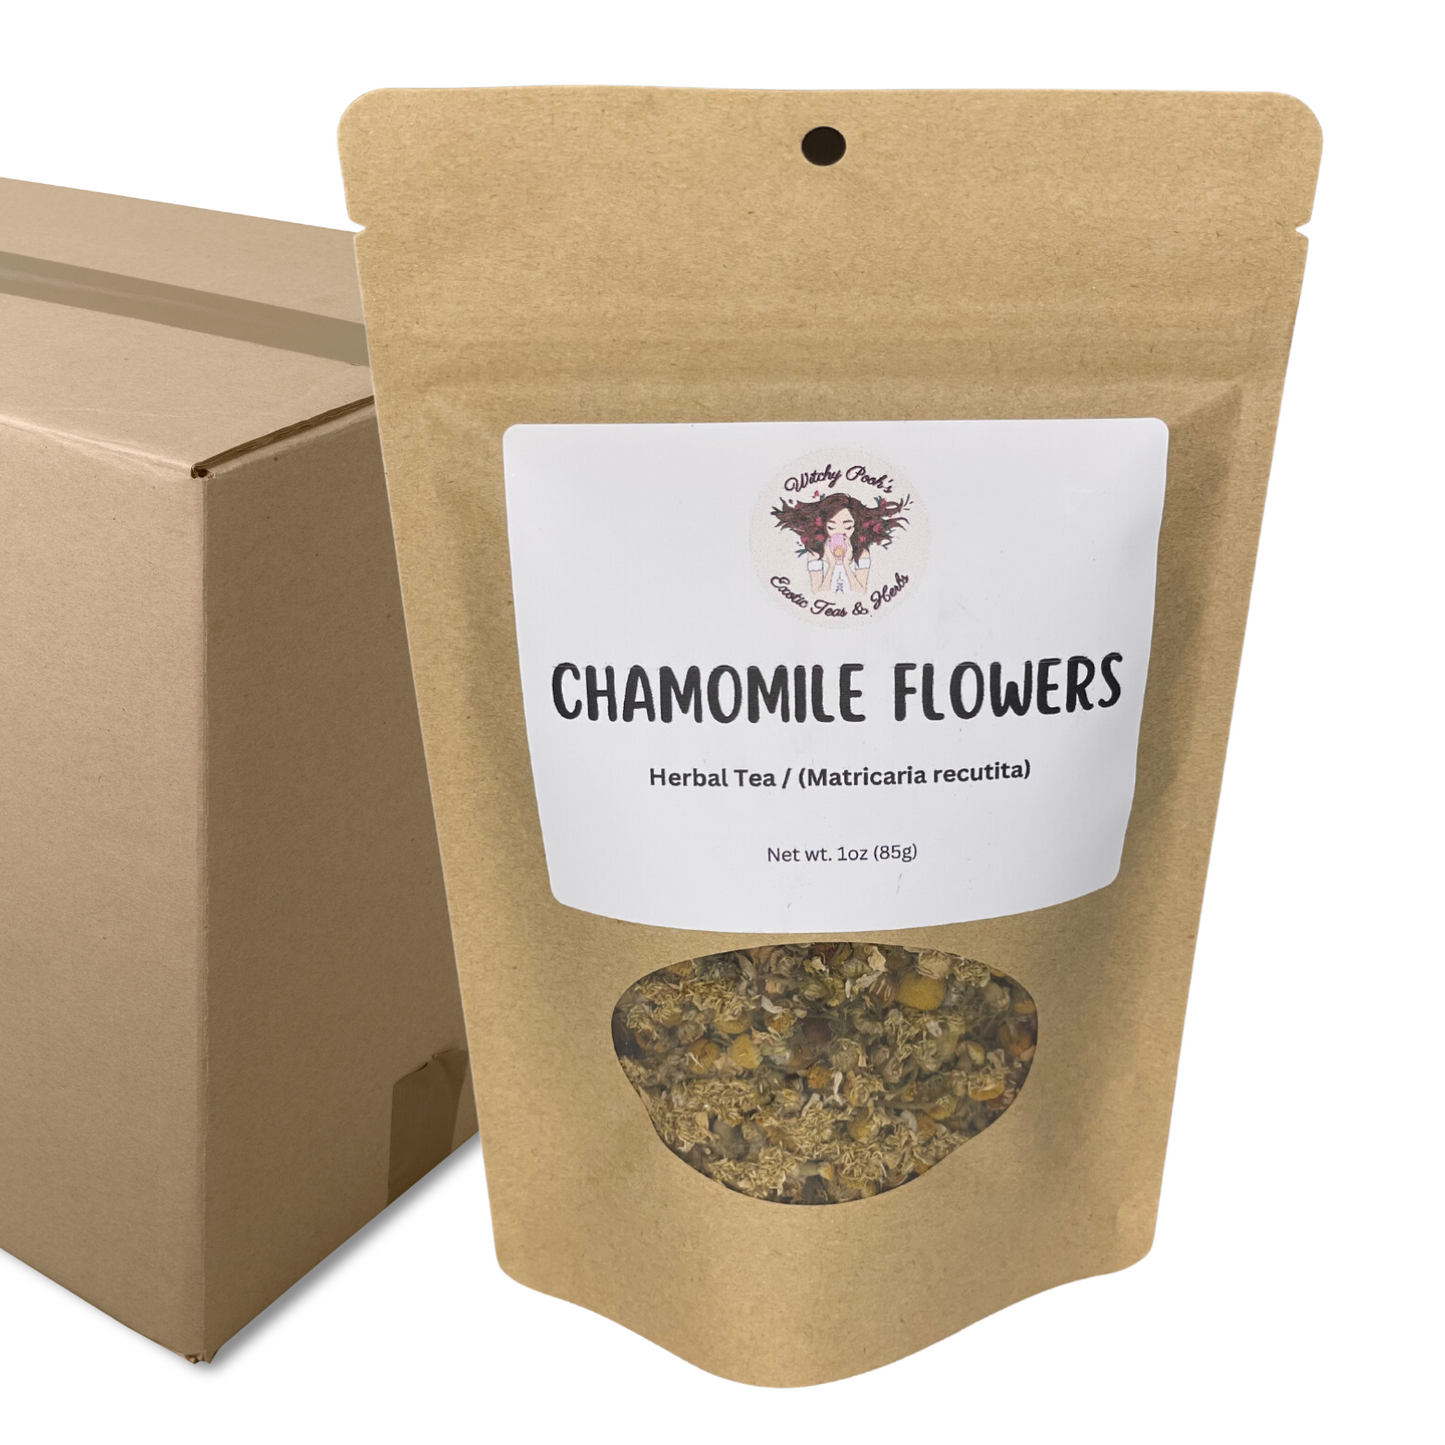 Witchy Pooh's Chamomile Flowers Loose Leaf Herbal Tea, Caffeine Free, For Stress Relief and Sleep Aid-17